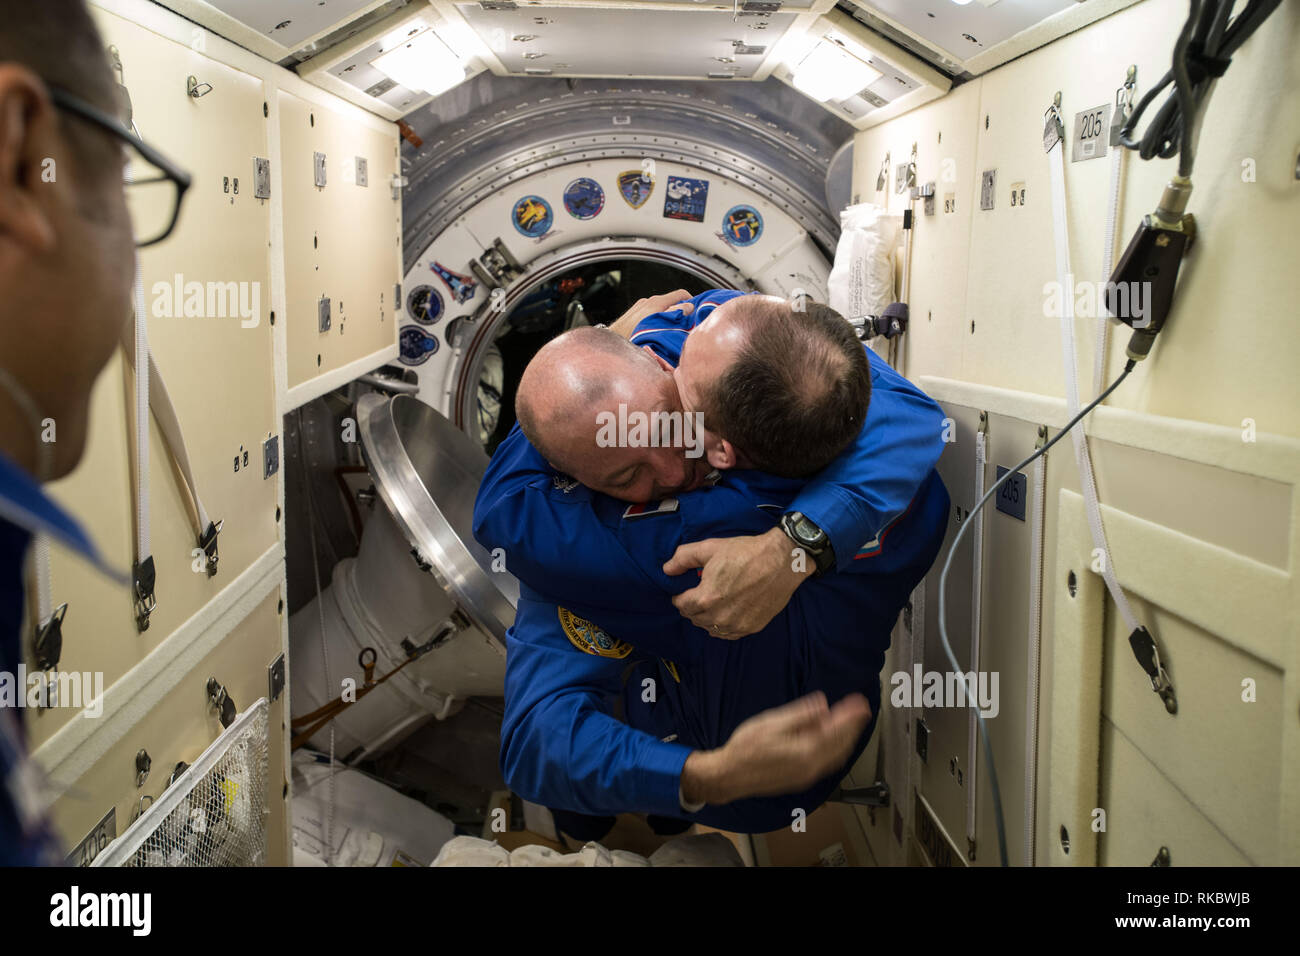 International Space Station Commander Alexander Misurkin welcomes newly arrived NASA astronaut Scott Tingle with a hug inside the Rassvet Mini-Research Module aboard the International Space Station December 19, 2017 in Earth Orbit. Tingle arrived moments before aboard the  Soyuz MS-07 spacecraft. Stock Photo